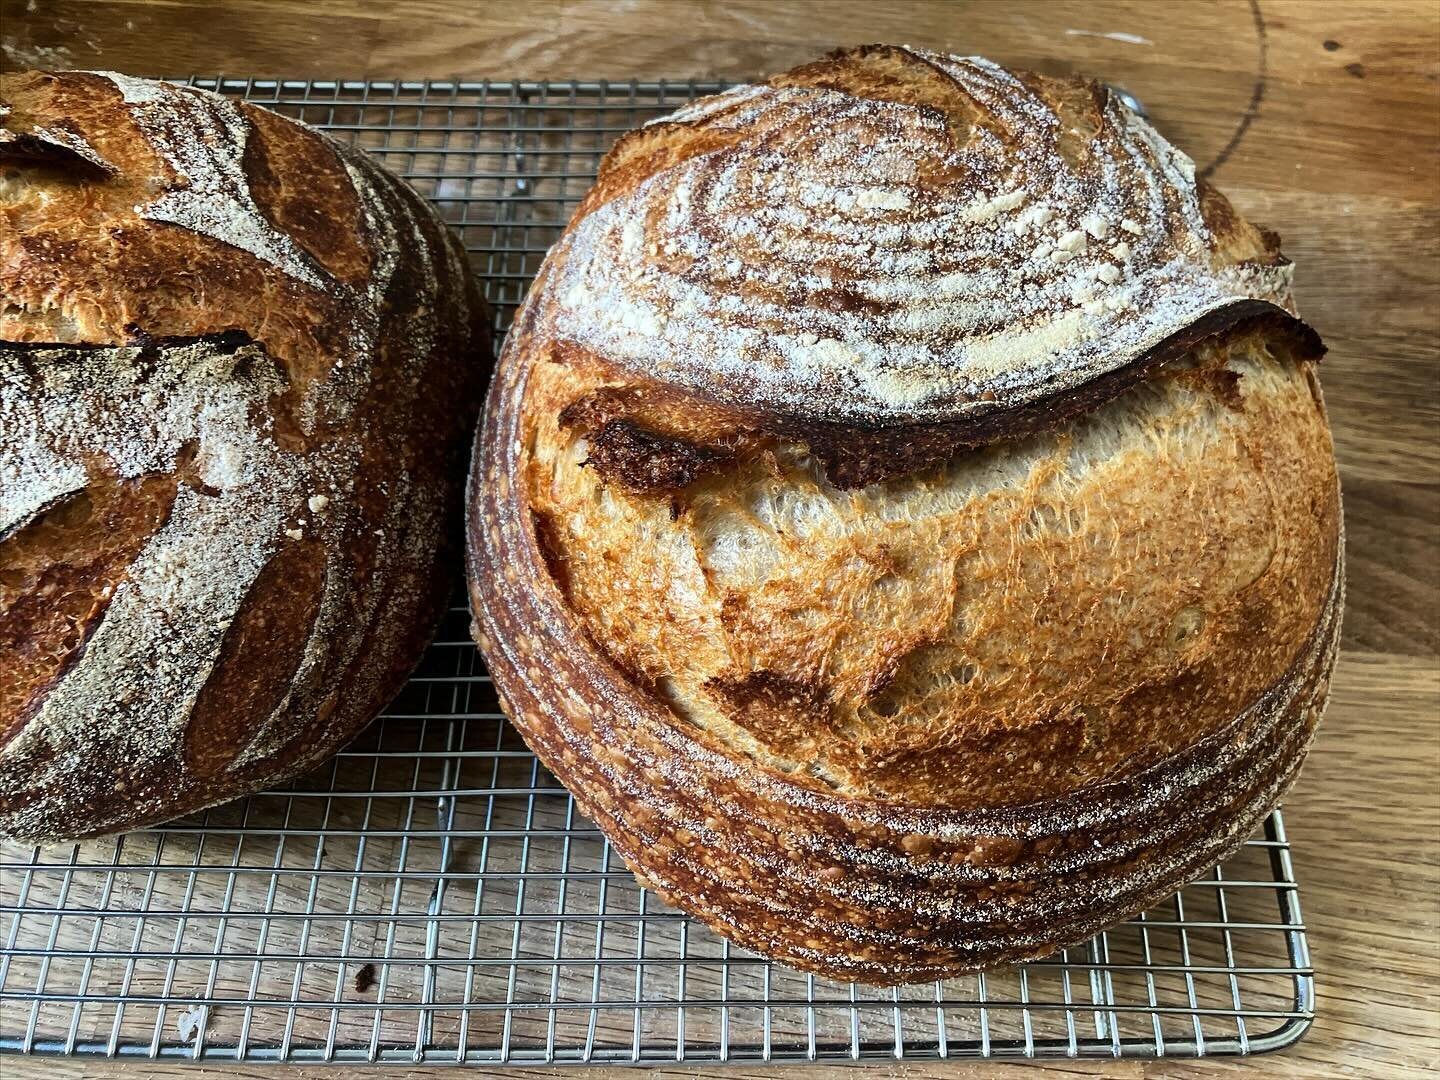 Upcoming dates for Sourdough for the Home-baker: 3/10, 4/29, 6/9